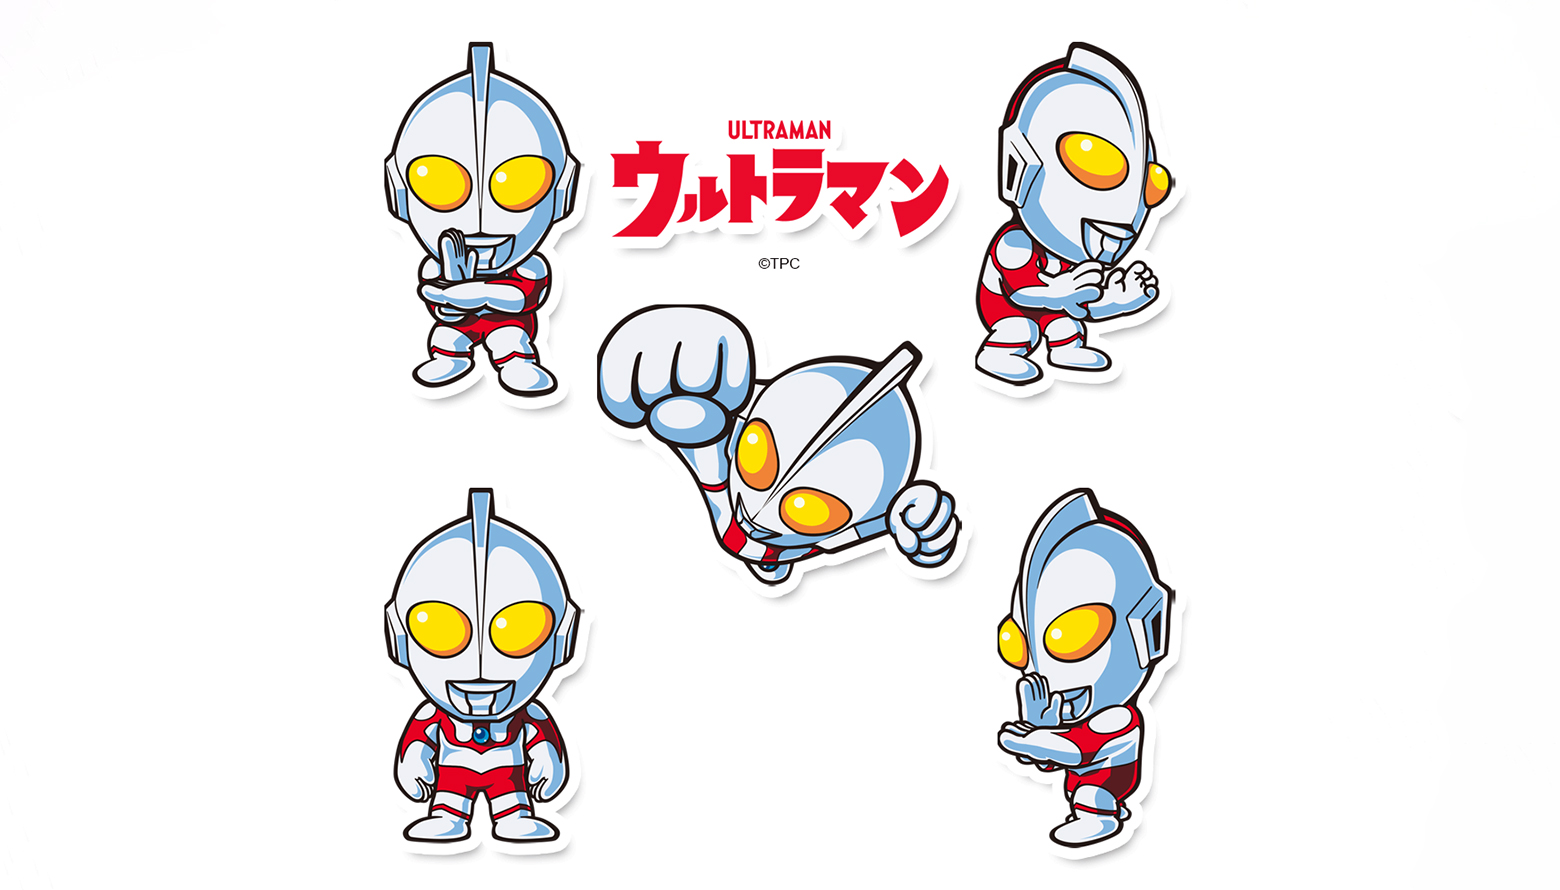 ULTRAMAN AND IT’S A SKIN TEAM UP TO ULTRA-FY YOUR DEVICES